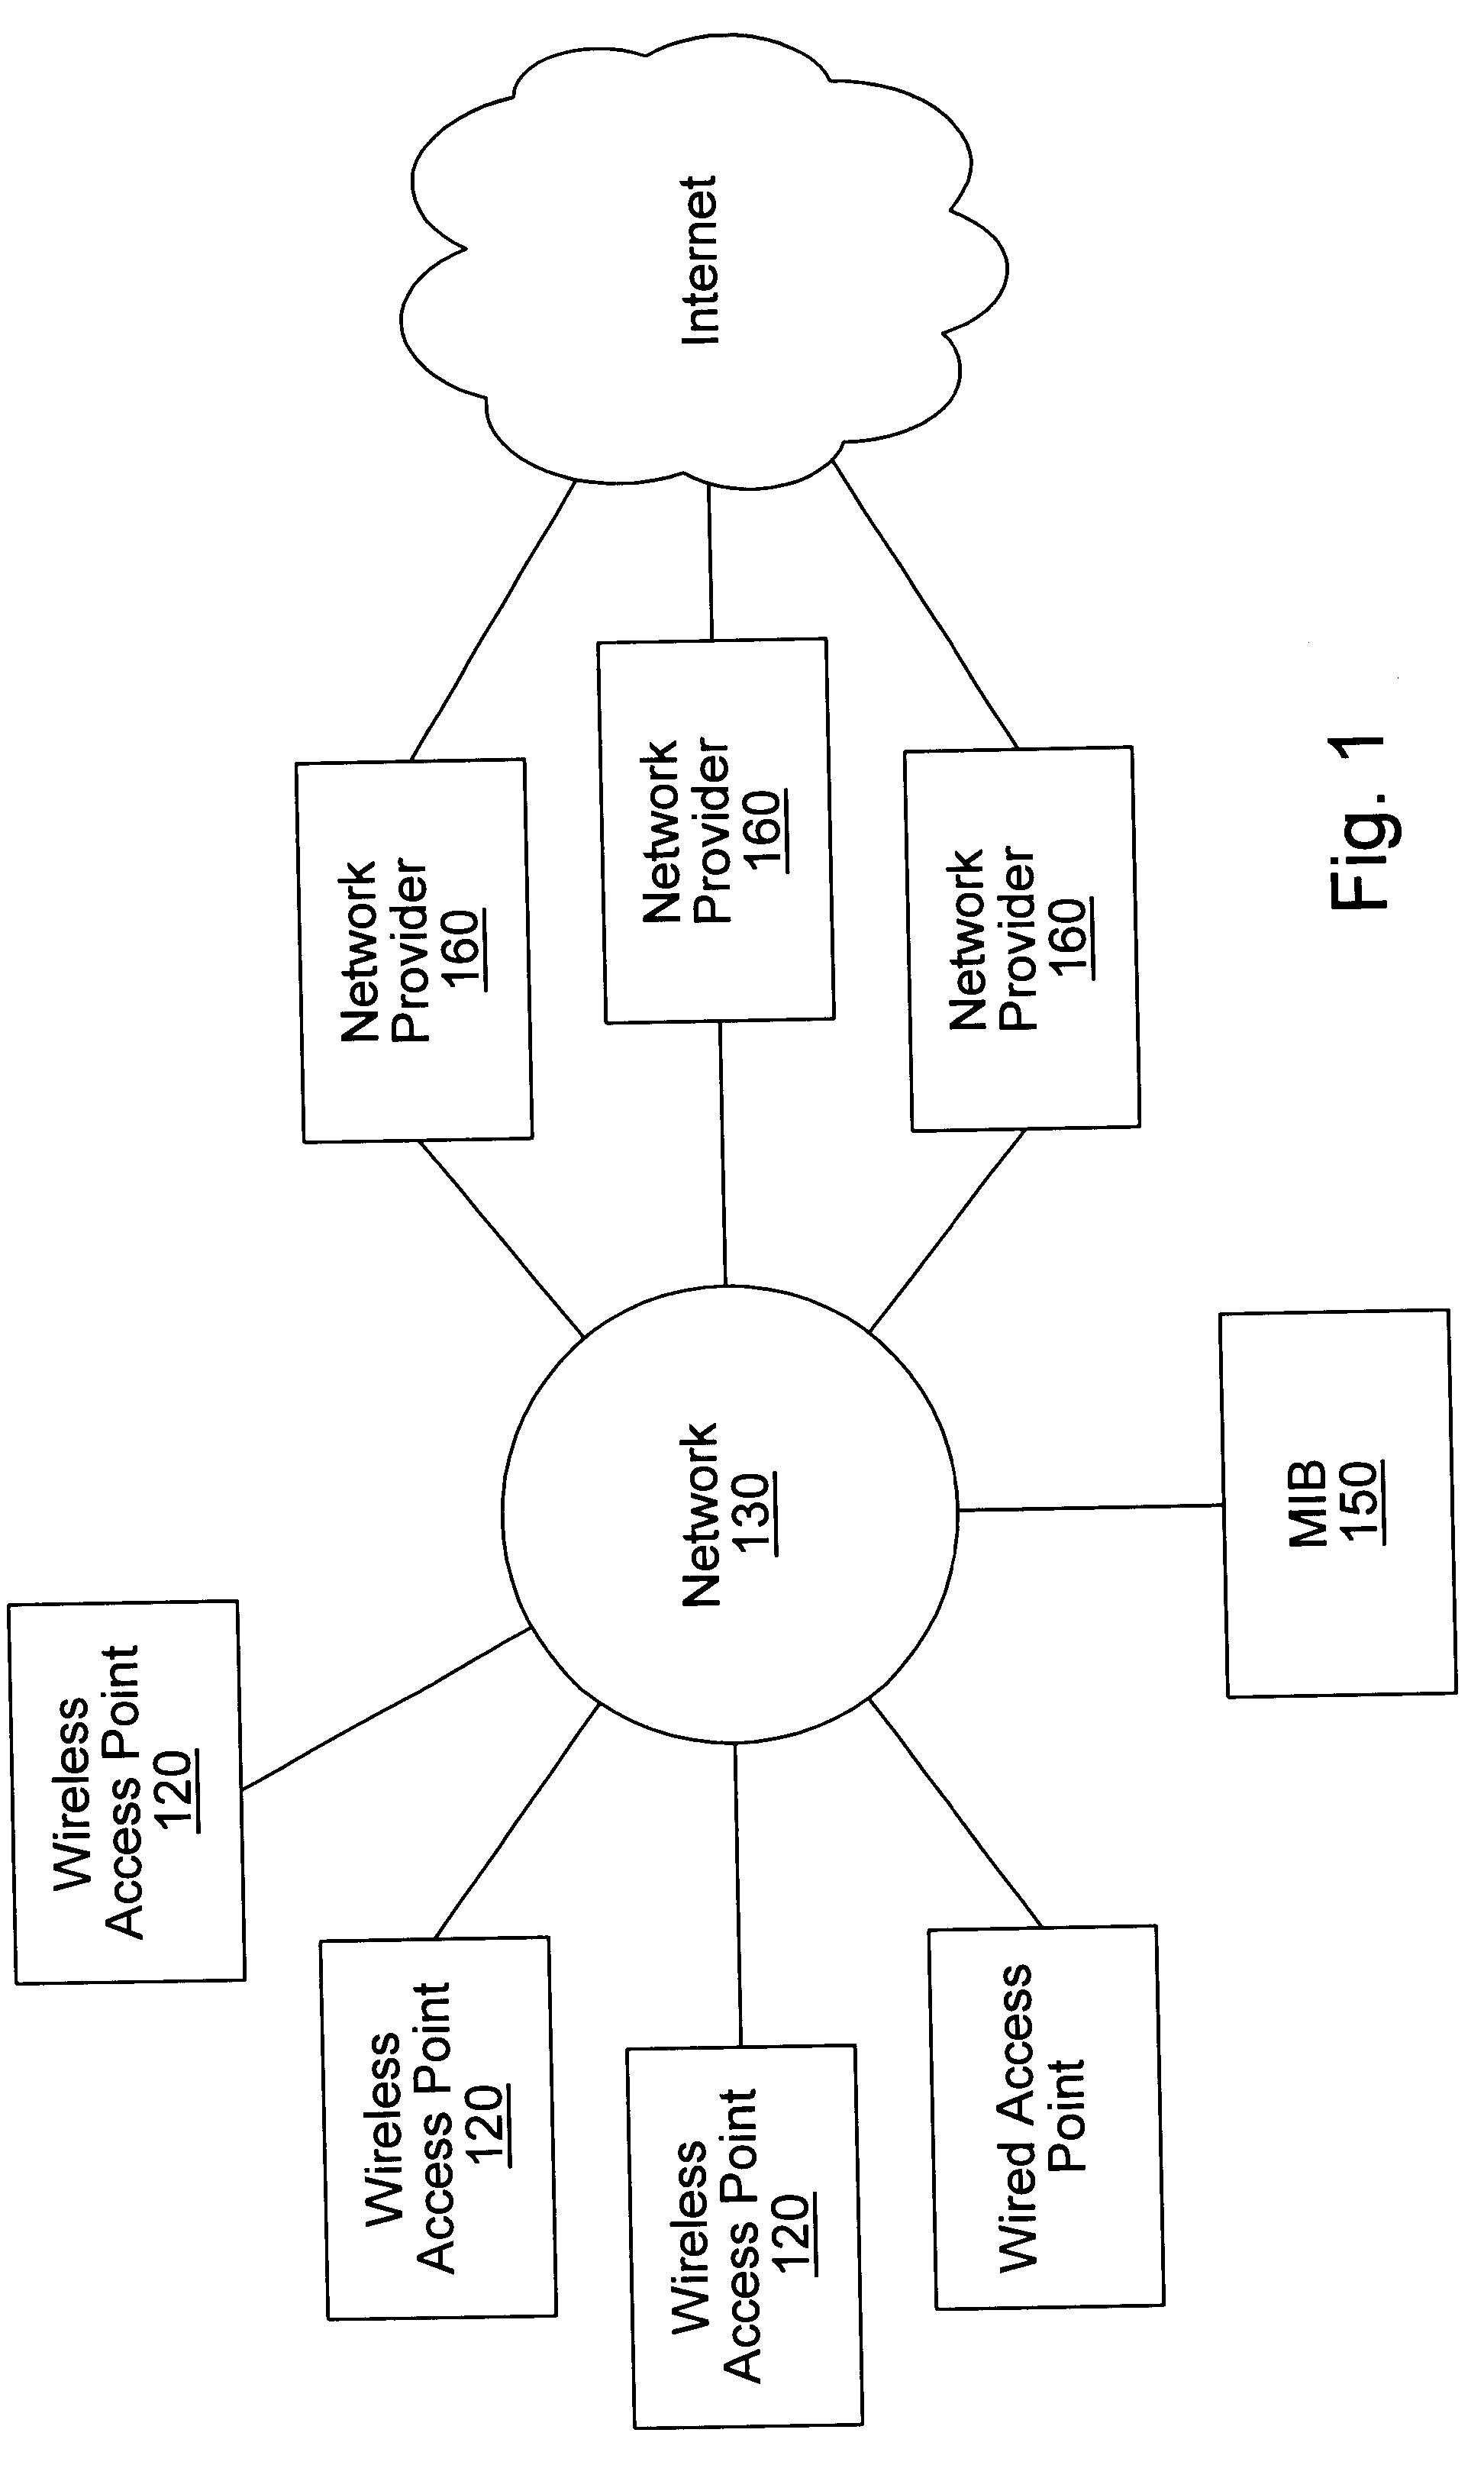 Distributed network communication system which enables multiple network providers to use a common distributed network infrastructure